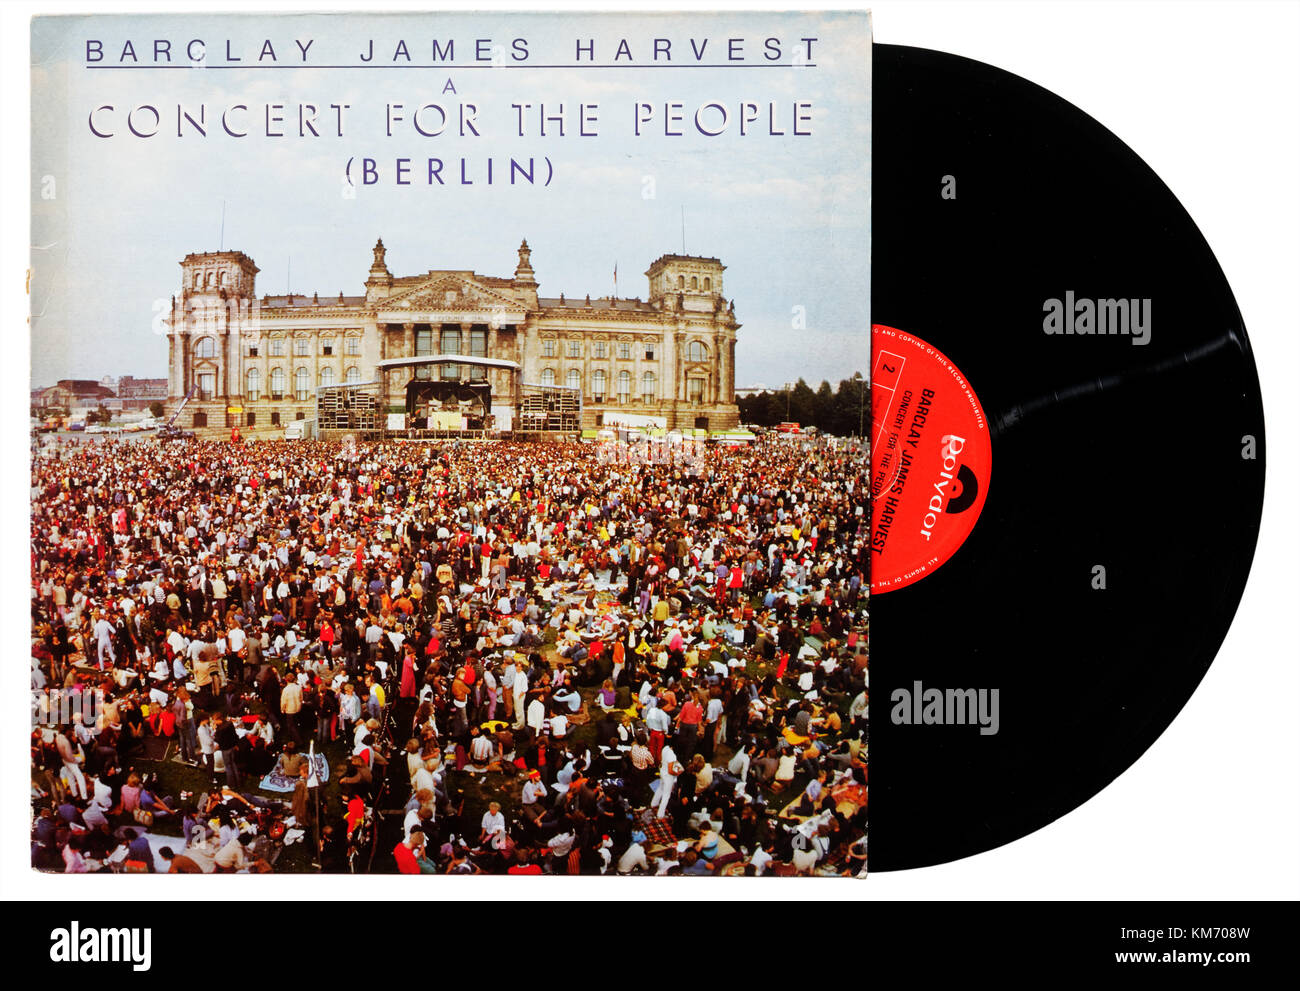 Barclay James Harvest Concert For the People (Berlin) album Stock Photo